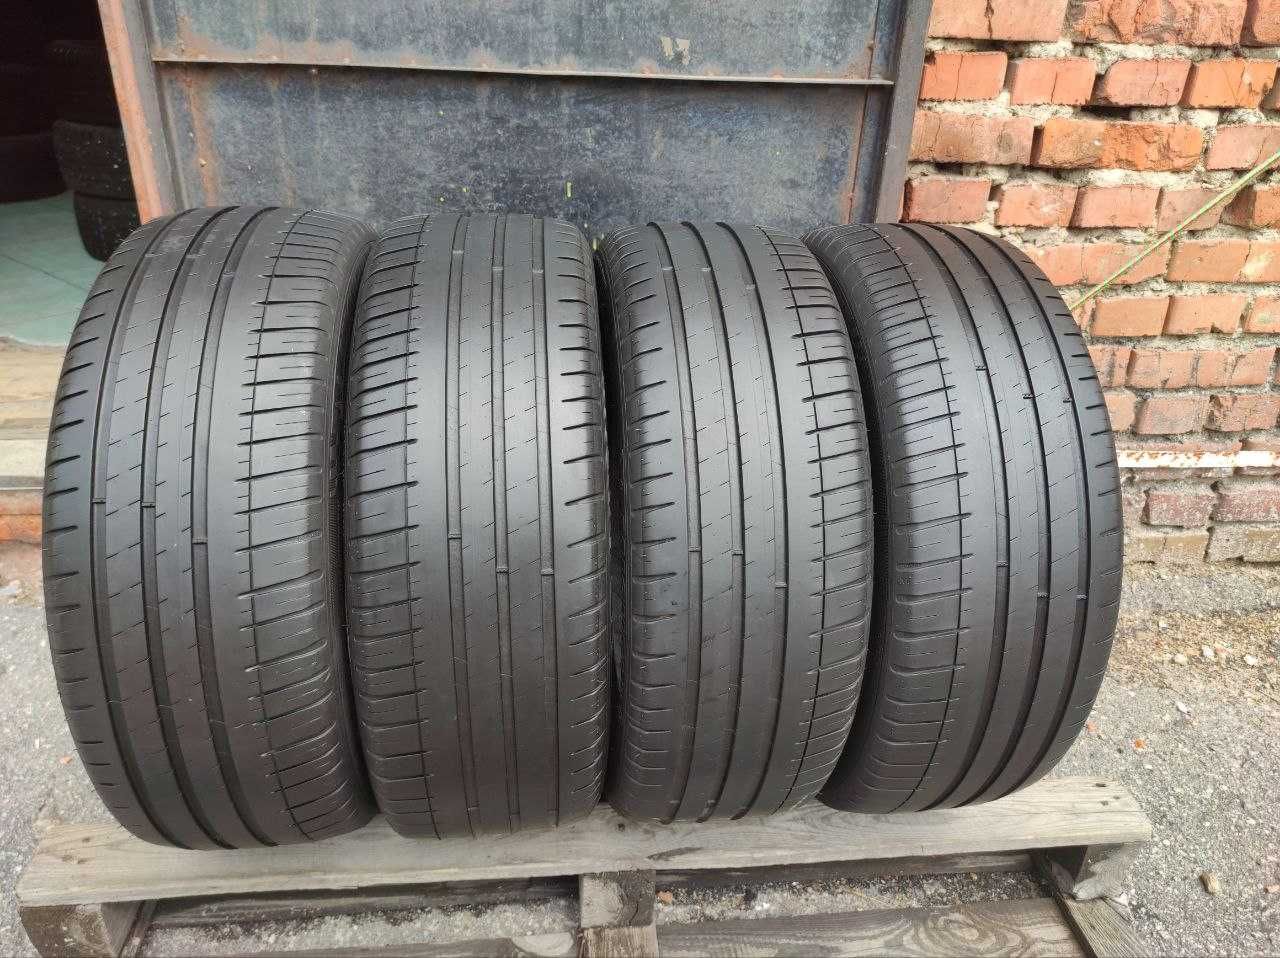 Michelin Pilot Sport 3 215/45r18 made in Spain 4шт 16-17год 5,2-5,6мм,